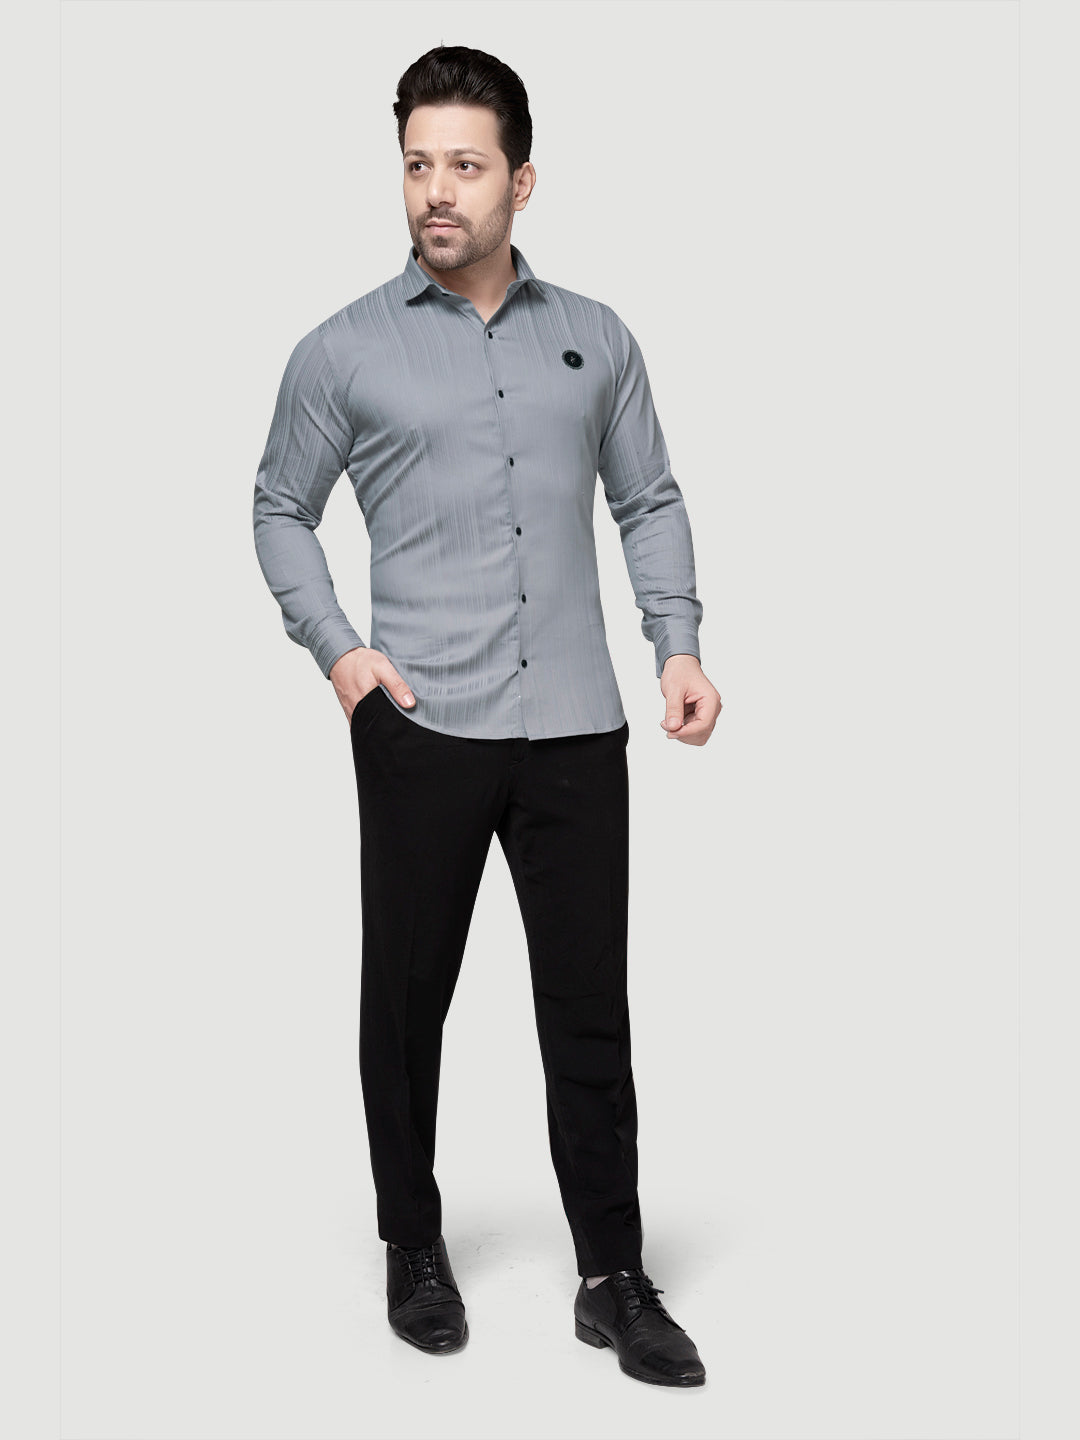 Black and White Shirts Men's Designer Shirt with Broach-1